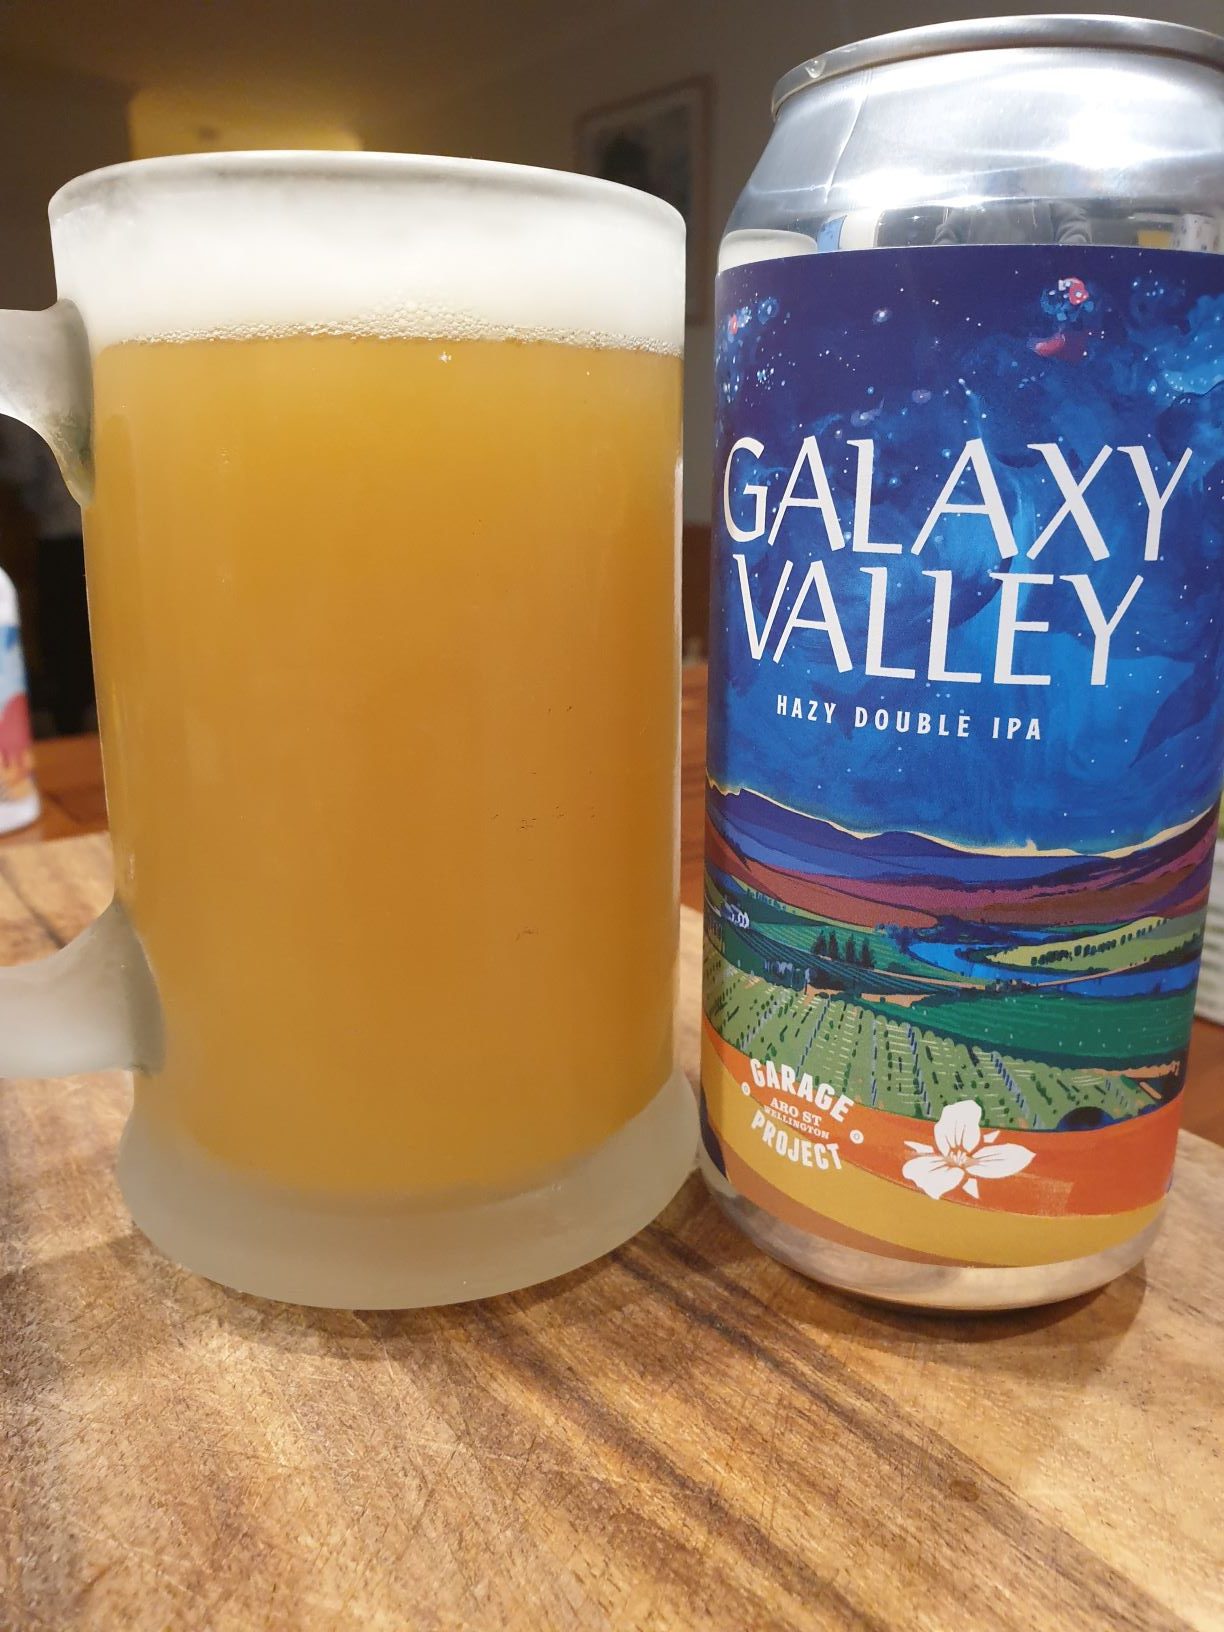 Galaxy Valley Hazy Double IPA by Garage Project (ft Trillium)